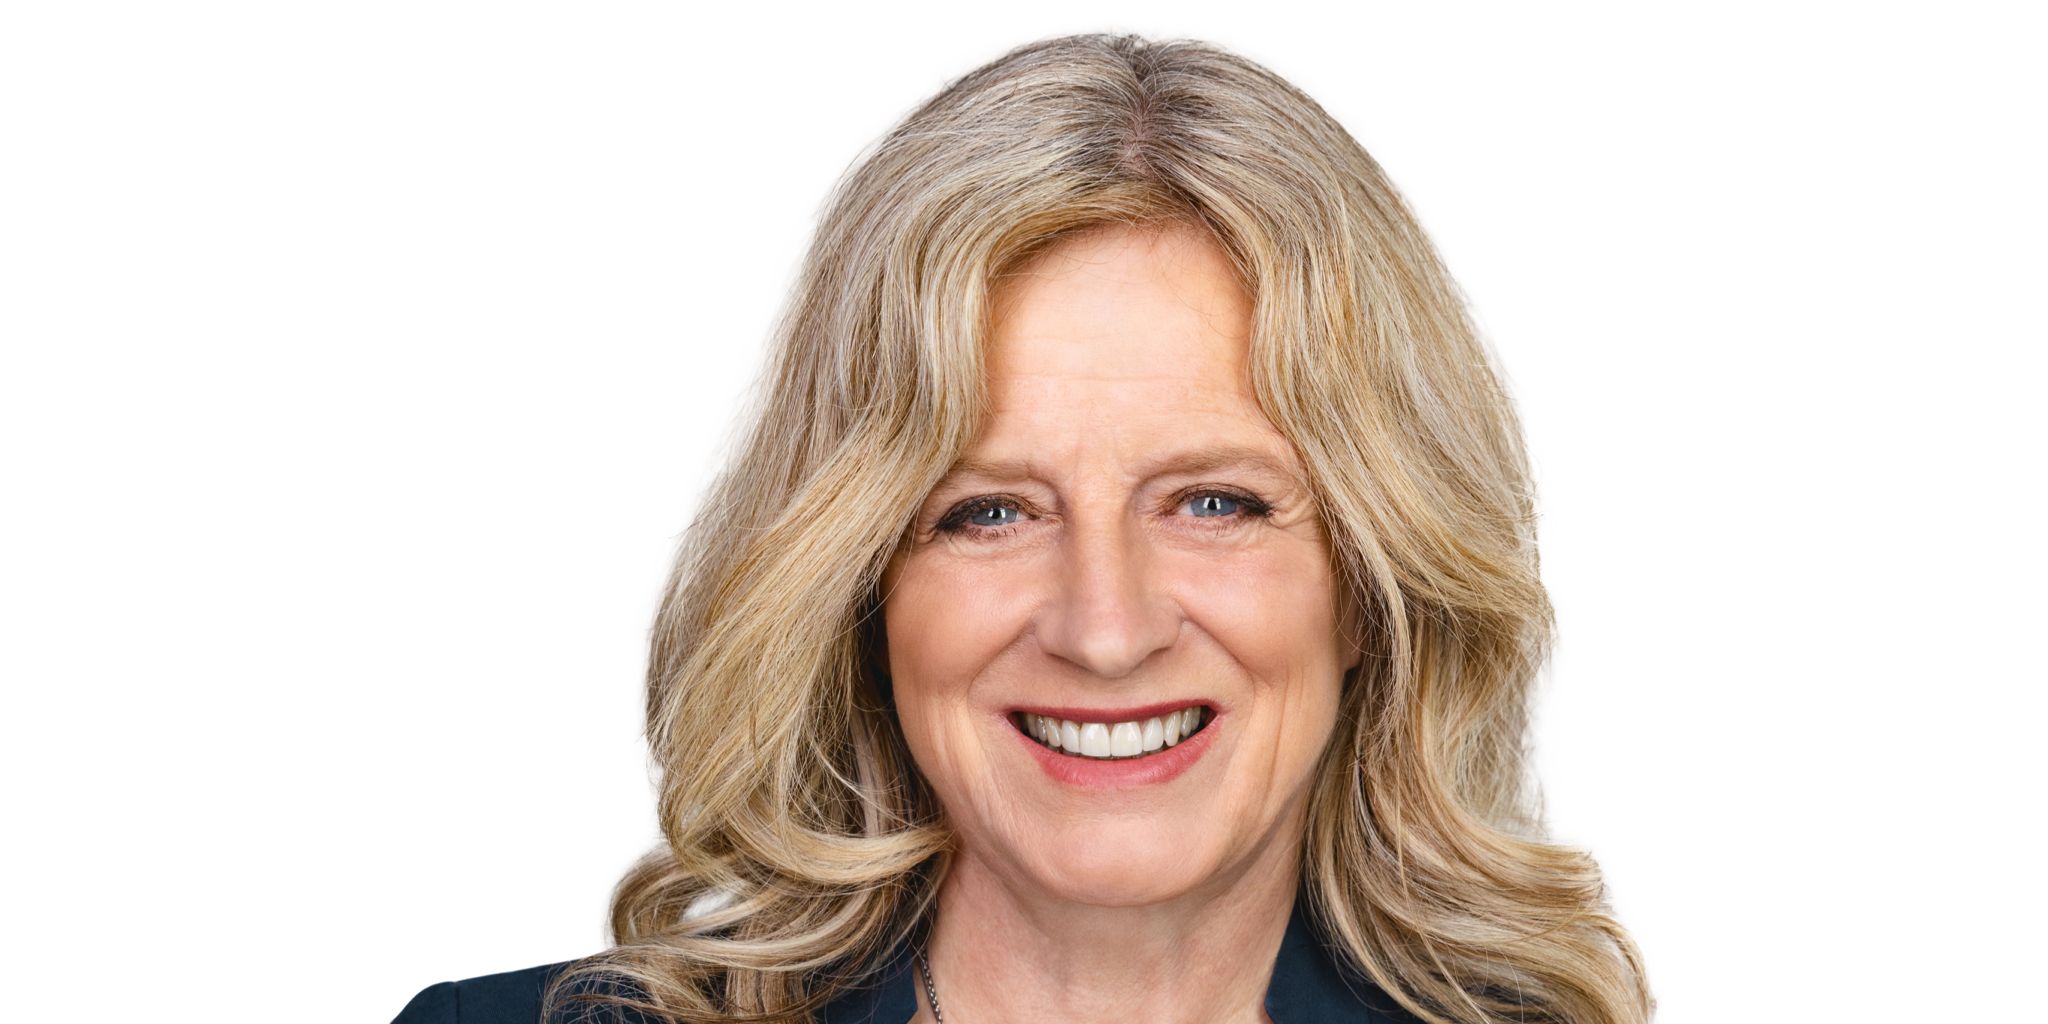 Rachel Notley is the Leader of the Alberta New Democratic Party